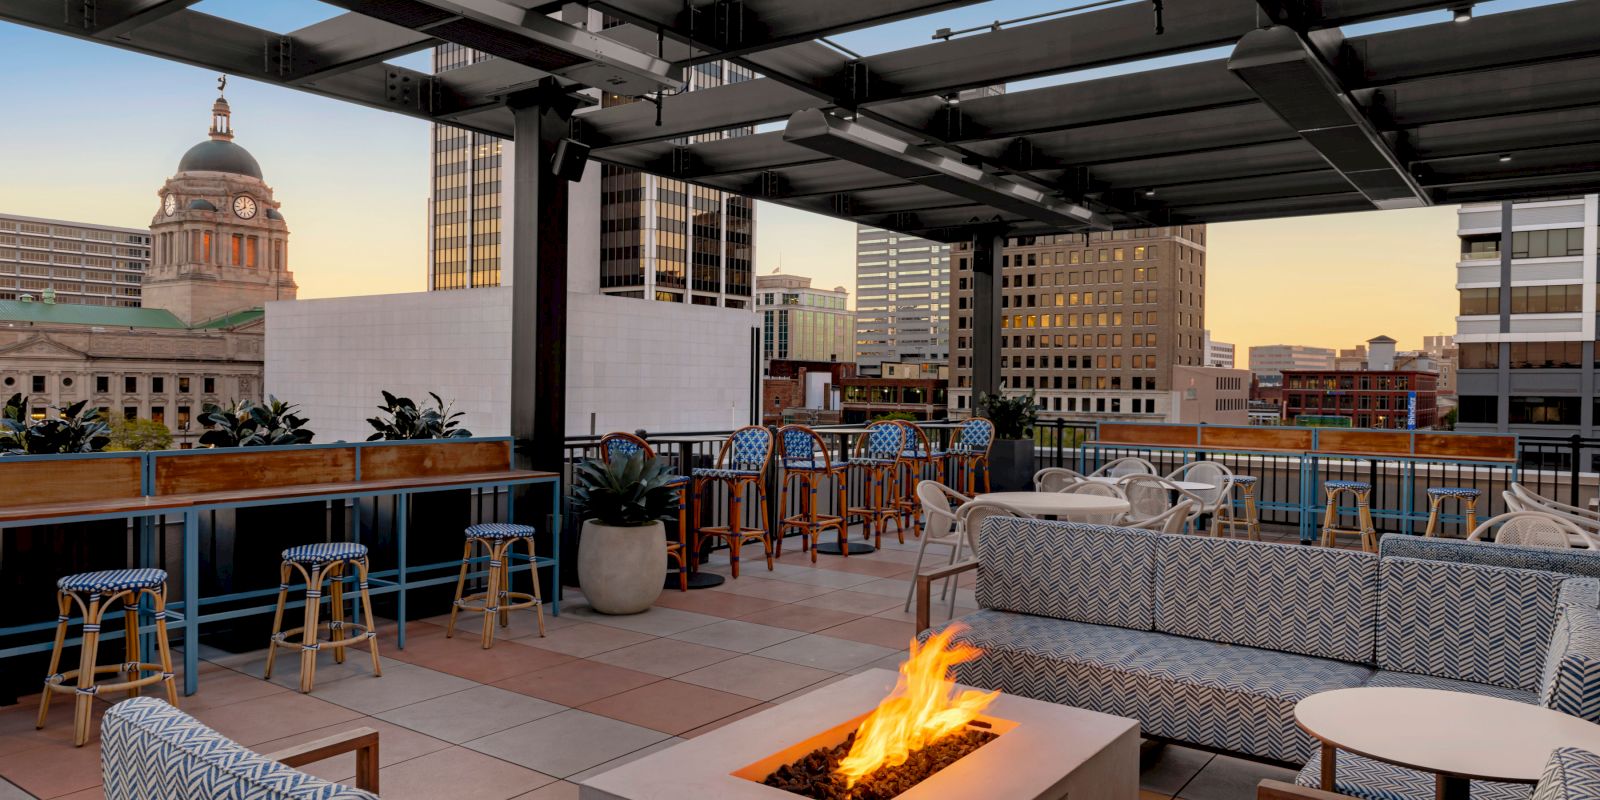 A rooftop lounge with modern seating, a fire pit, bar stools, and cityscape views during sunset. Tall buildings and a dome structure are visible.